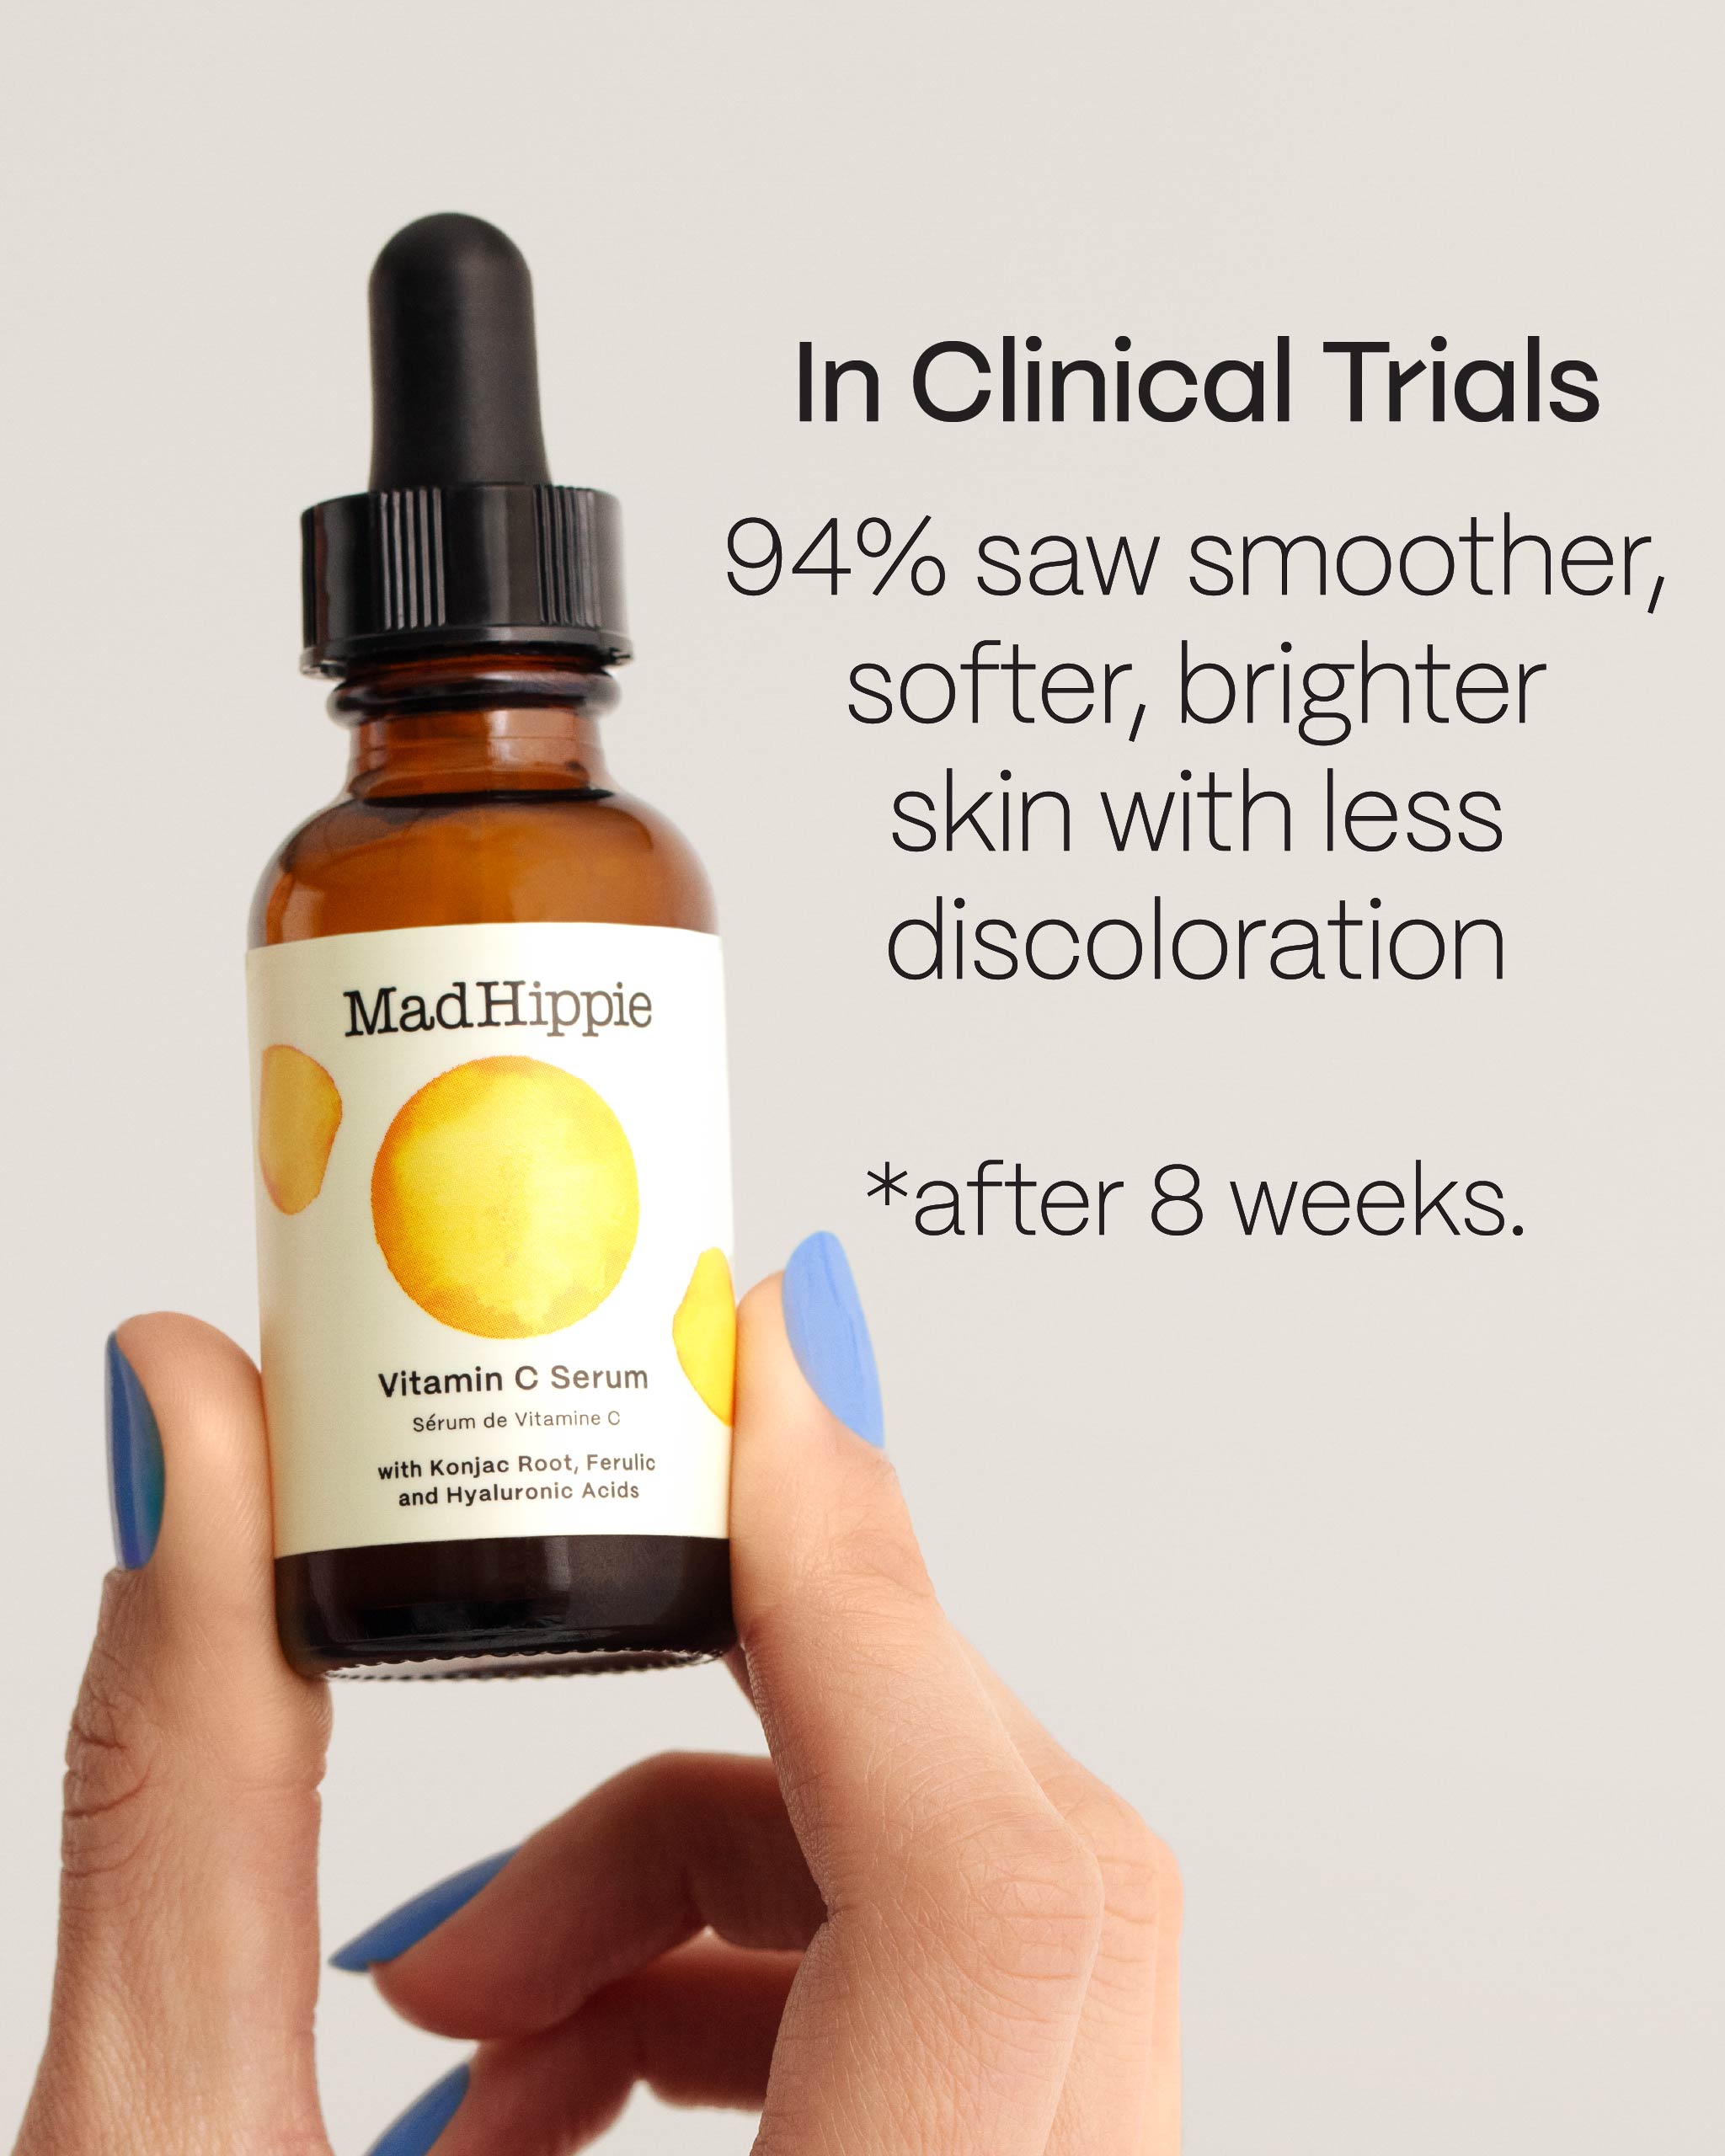 94% saw smoother brighter skin in clinical trials